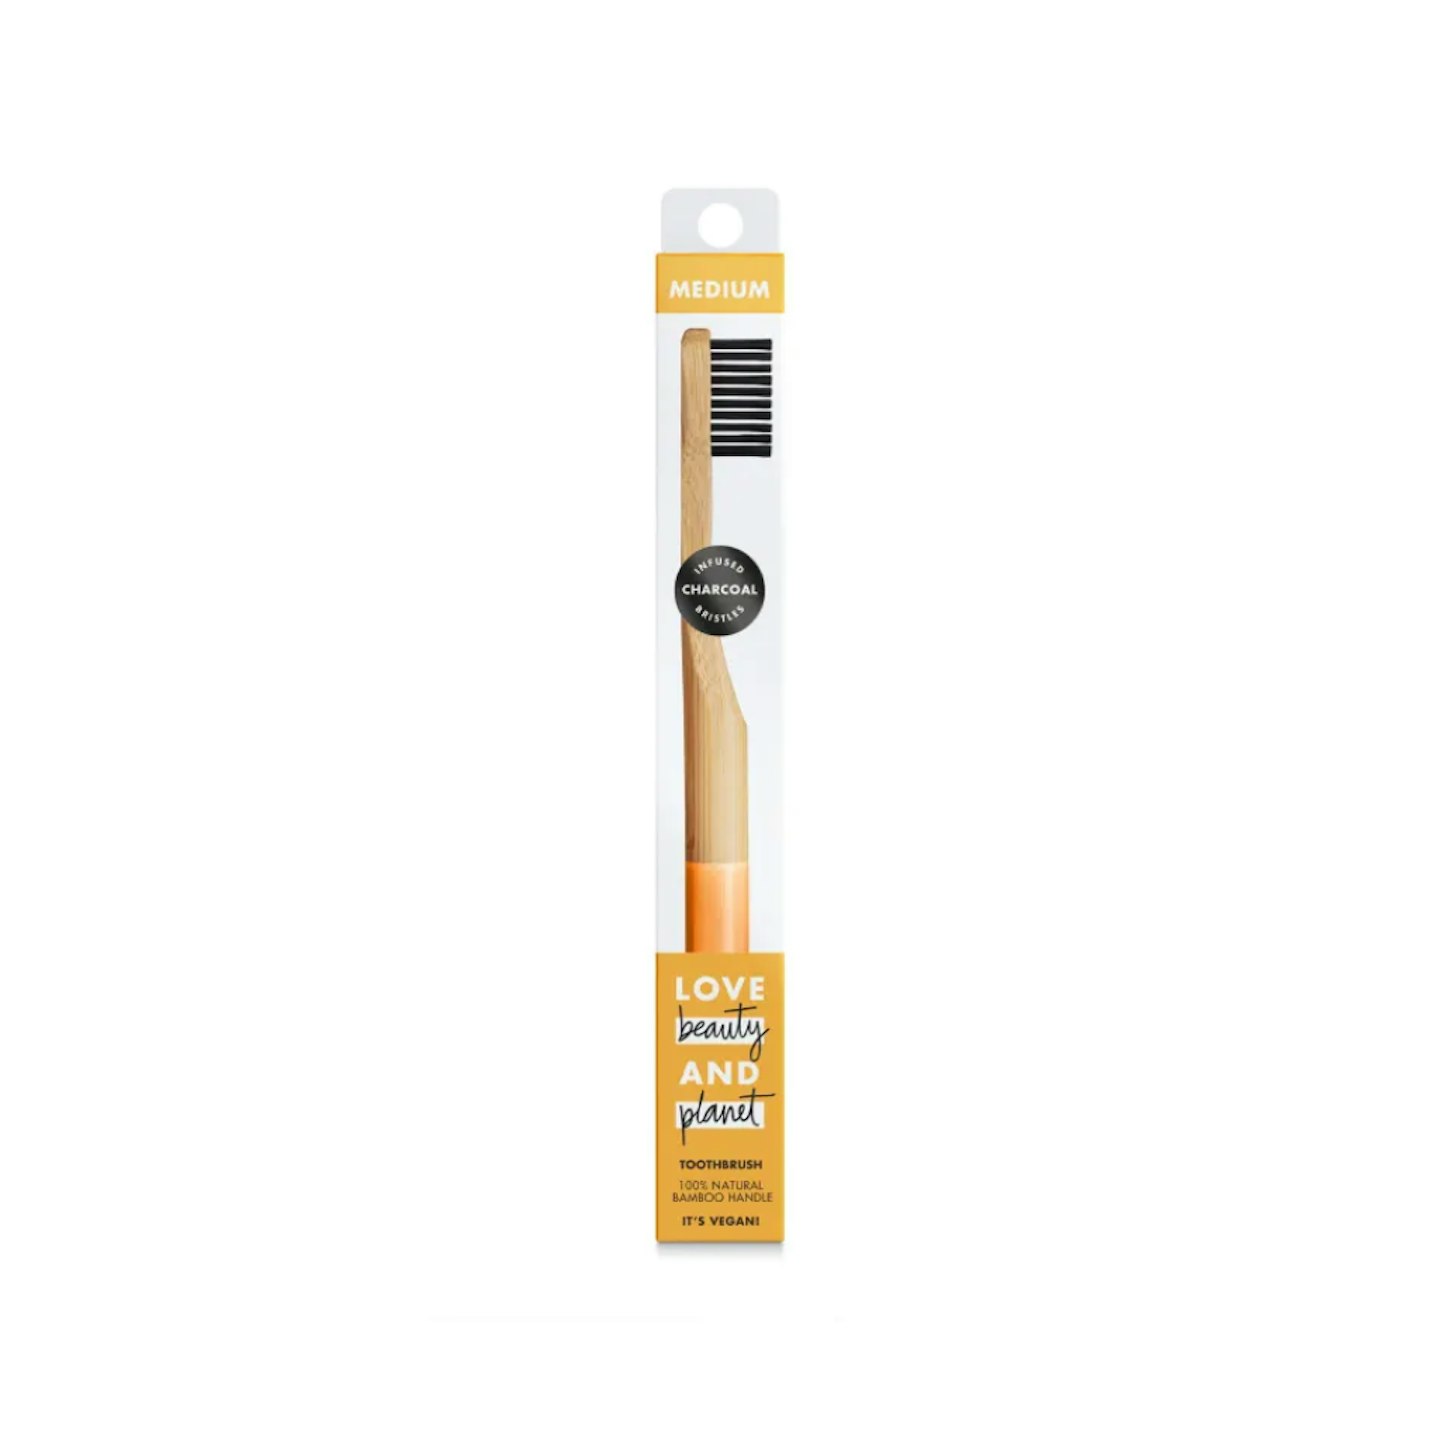 Love Beauty and Planet Medium Bamboo Toothbrush